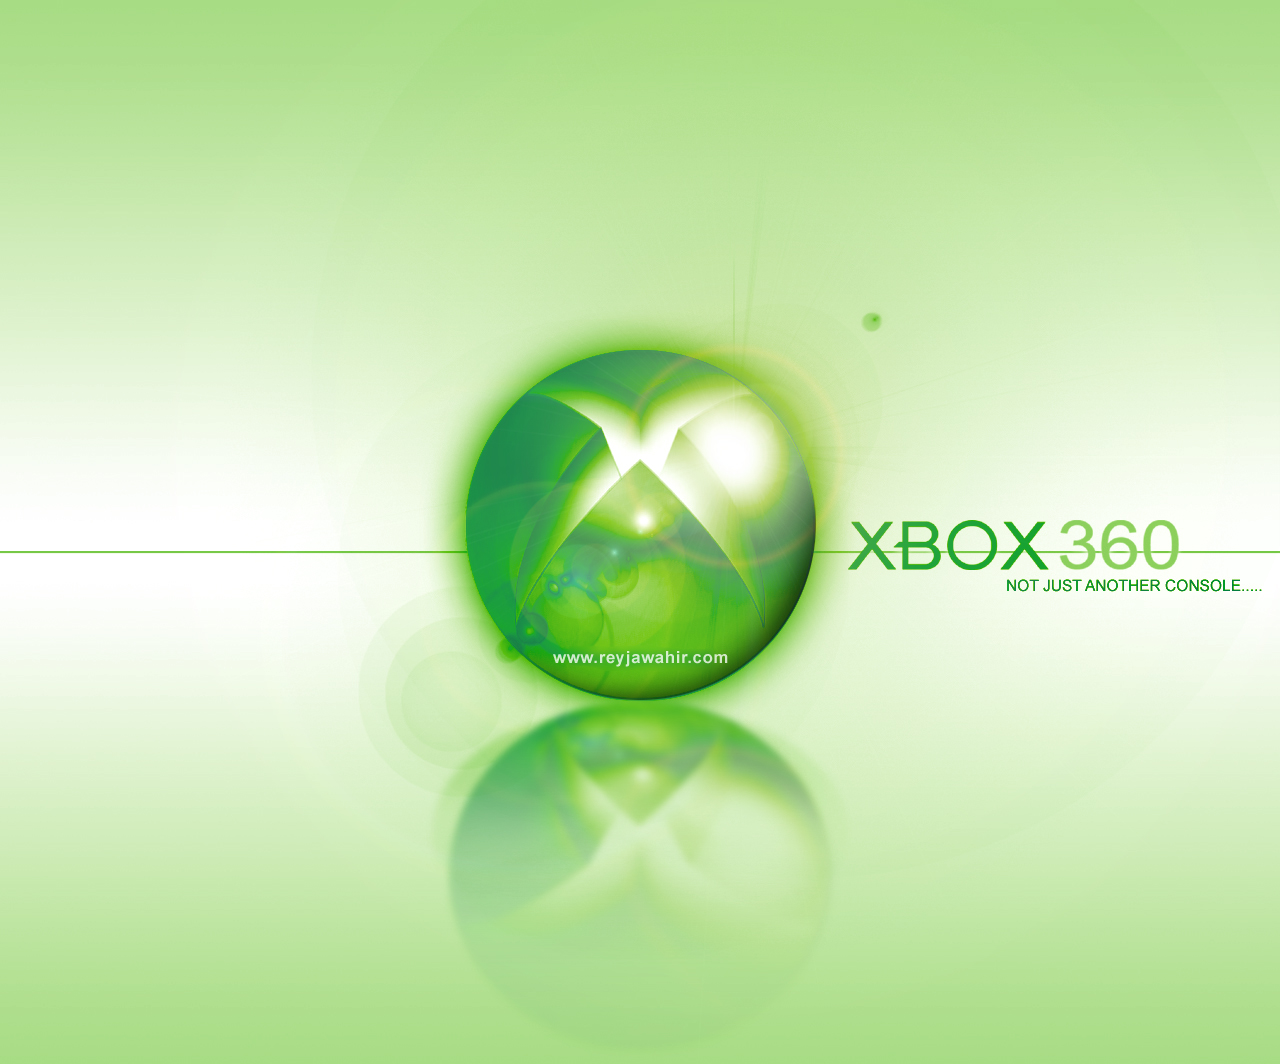 Another Xbox Wallpaper By Reyjdesigns